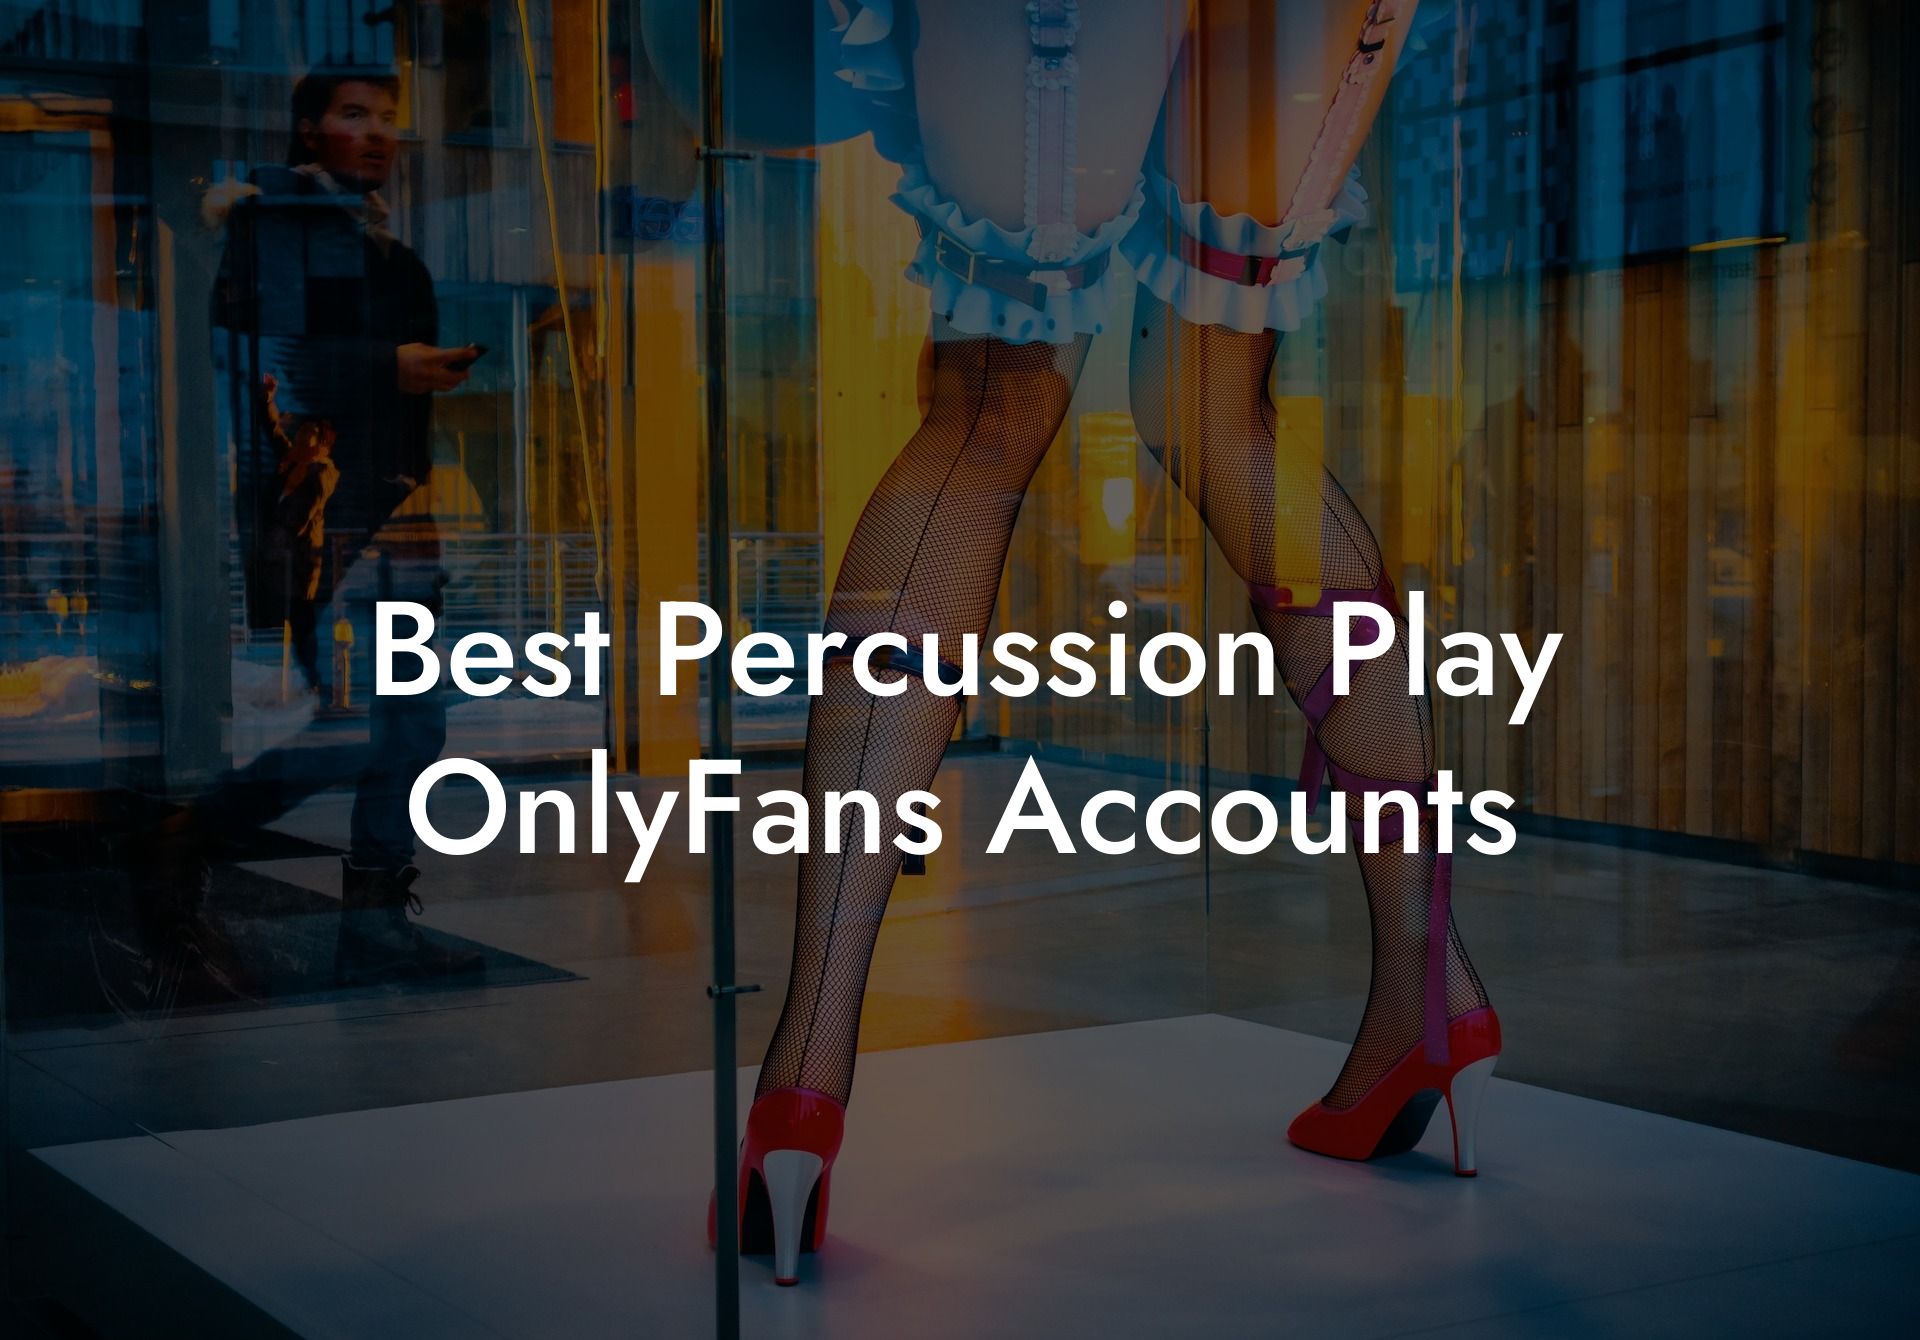 Best Percussion Play OnlyFans Accounts